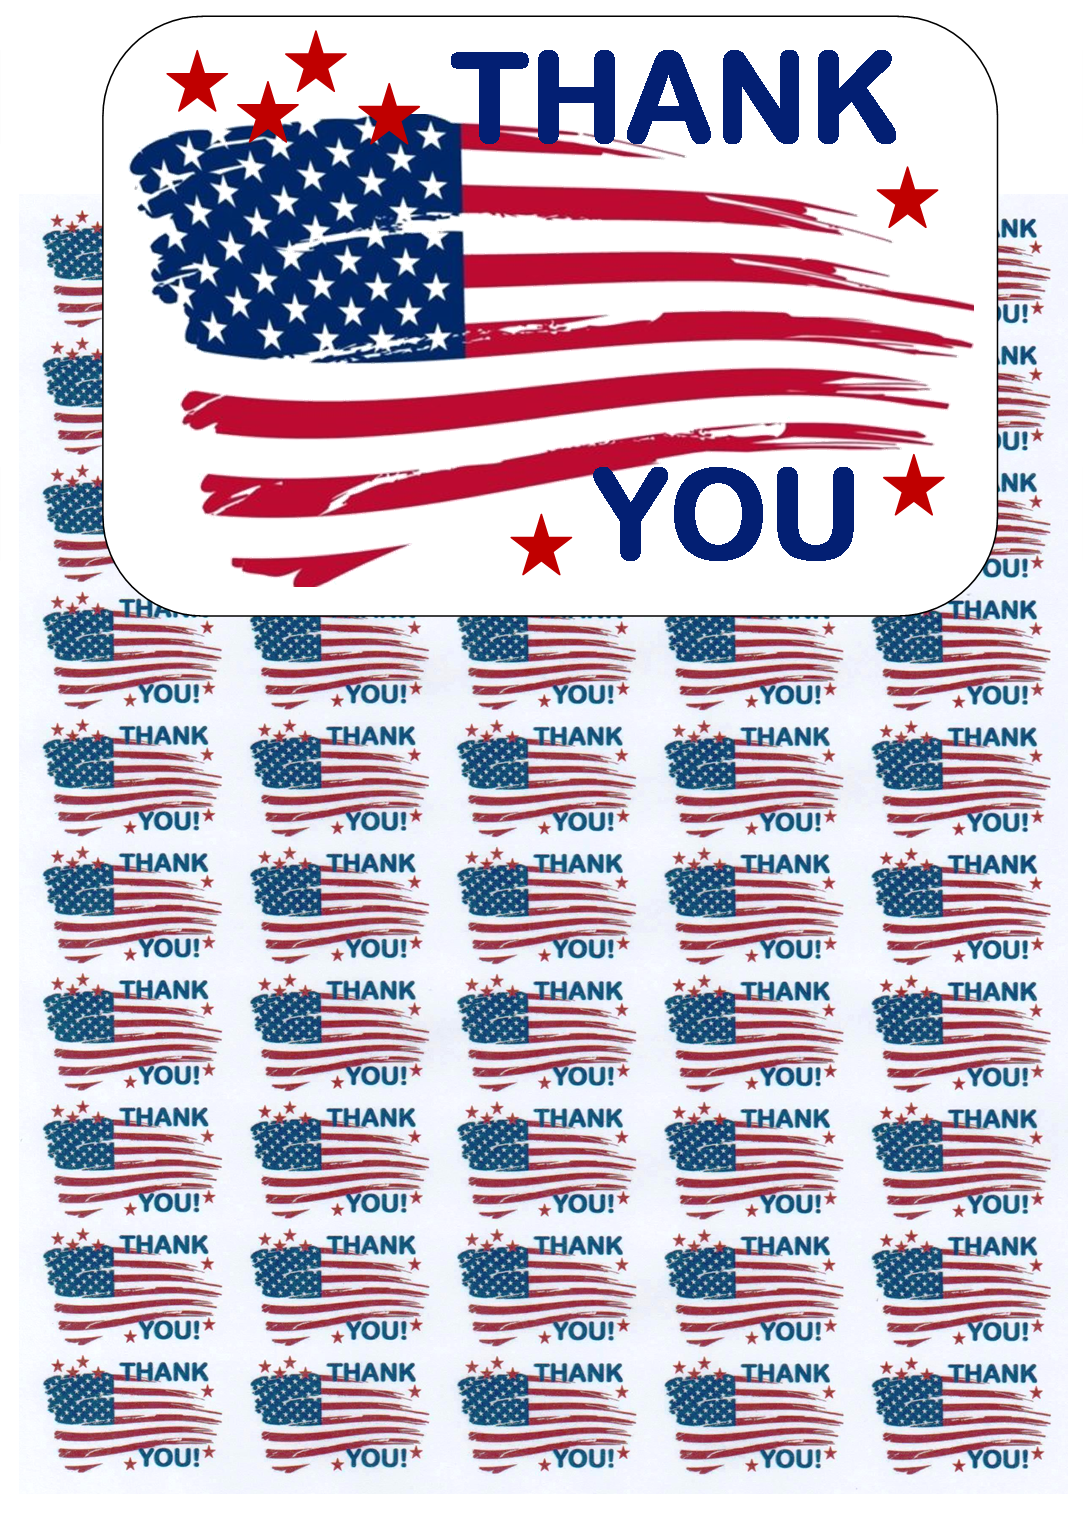 50 American Flag Thank You Envelope Seals / Labels / Stickers, 1" By 1.5"